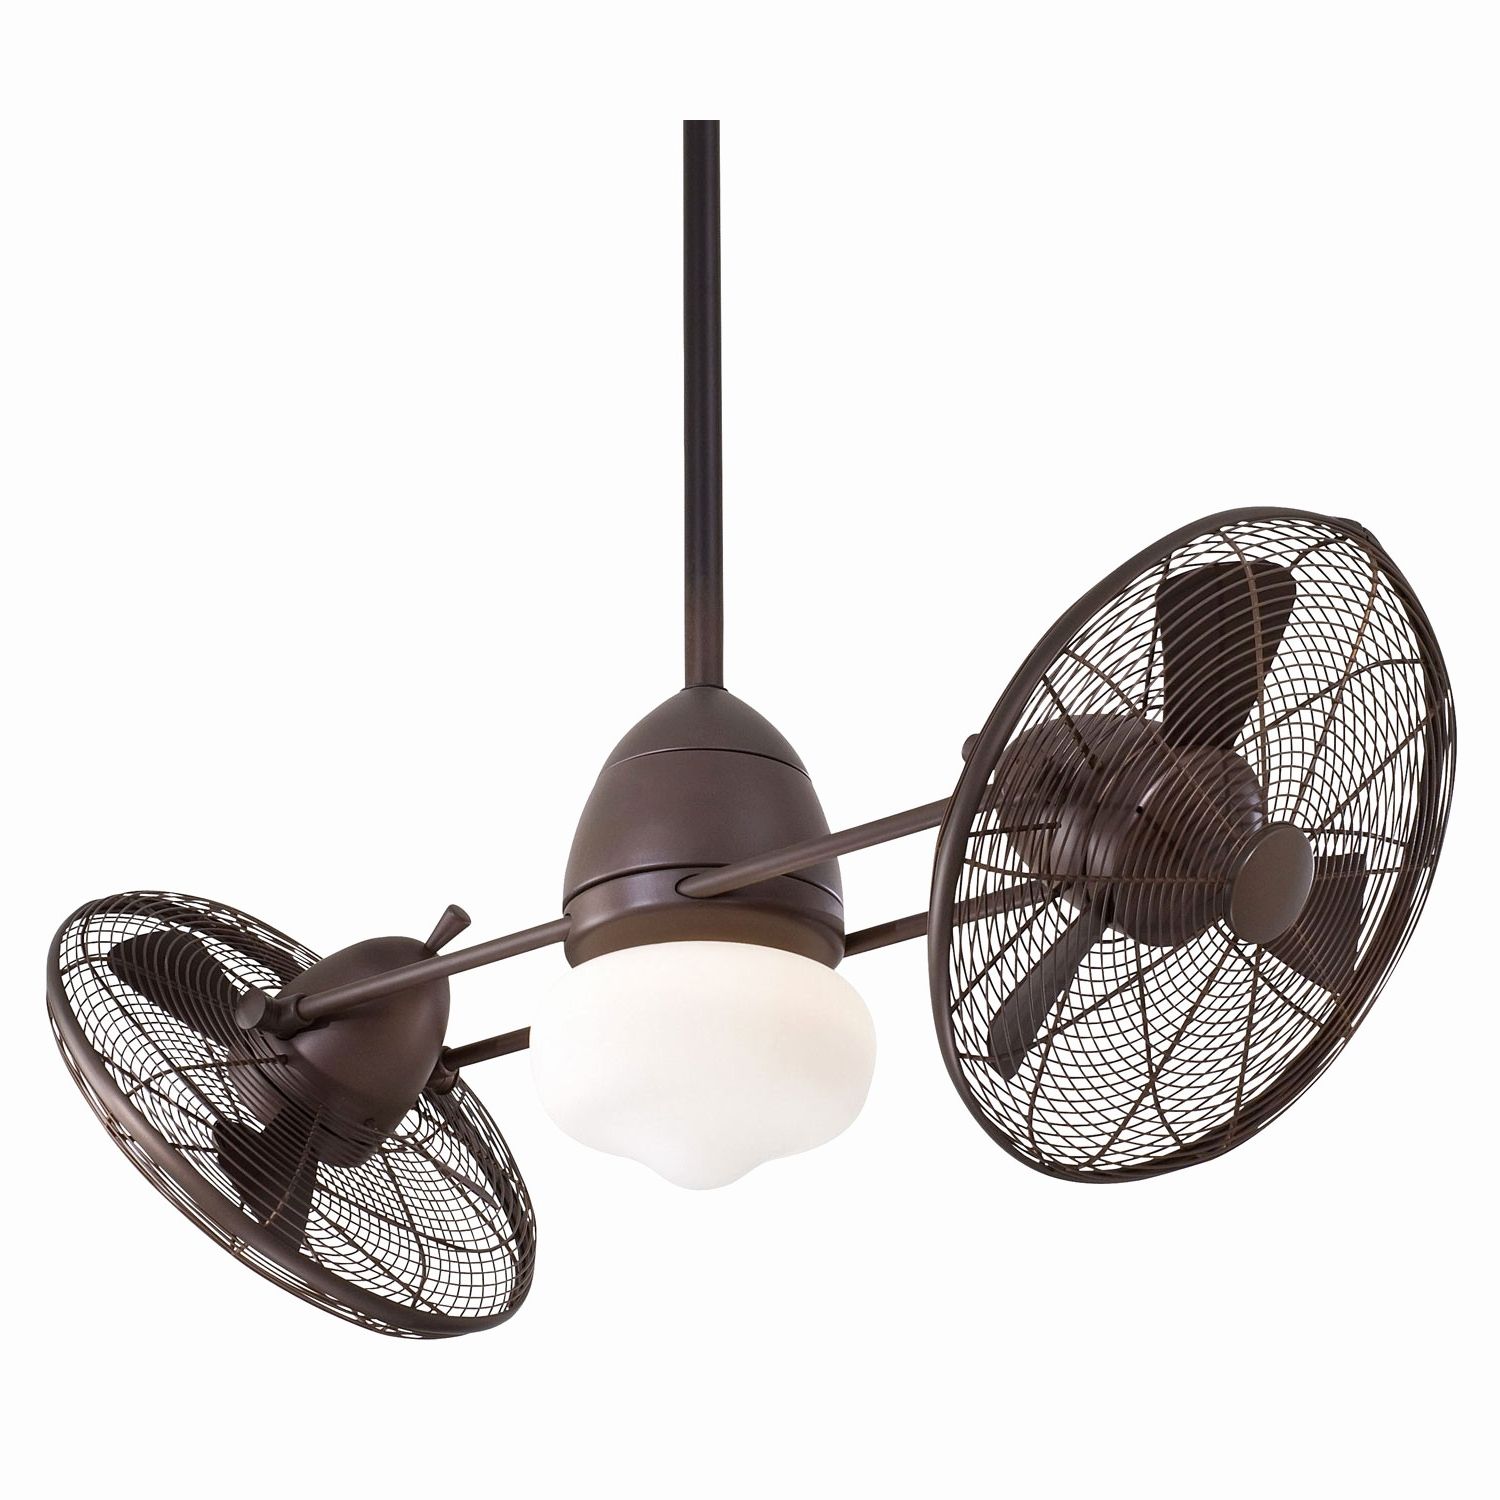 Preferred 72 Inch Ceiling Fan Lowes Lovely Ceiling Fan 72 Inch Outdoor Ceiling Throughout 20 Inch Outdoor Ceiling Fans With Light (View 17 of 20)